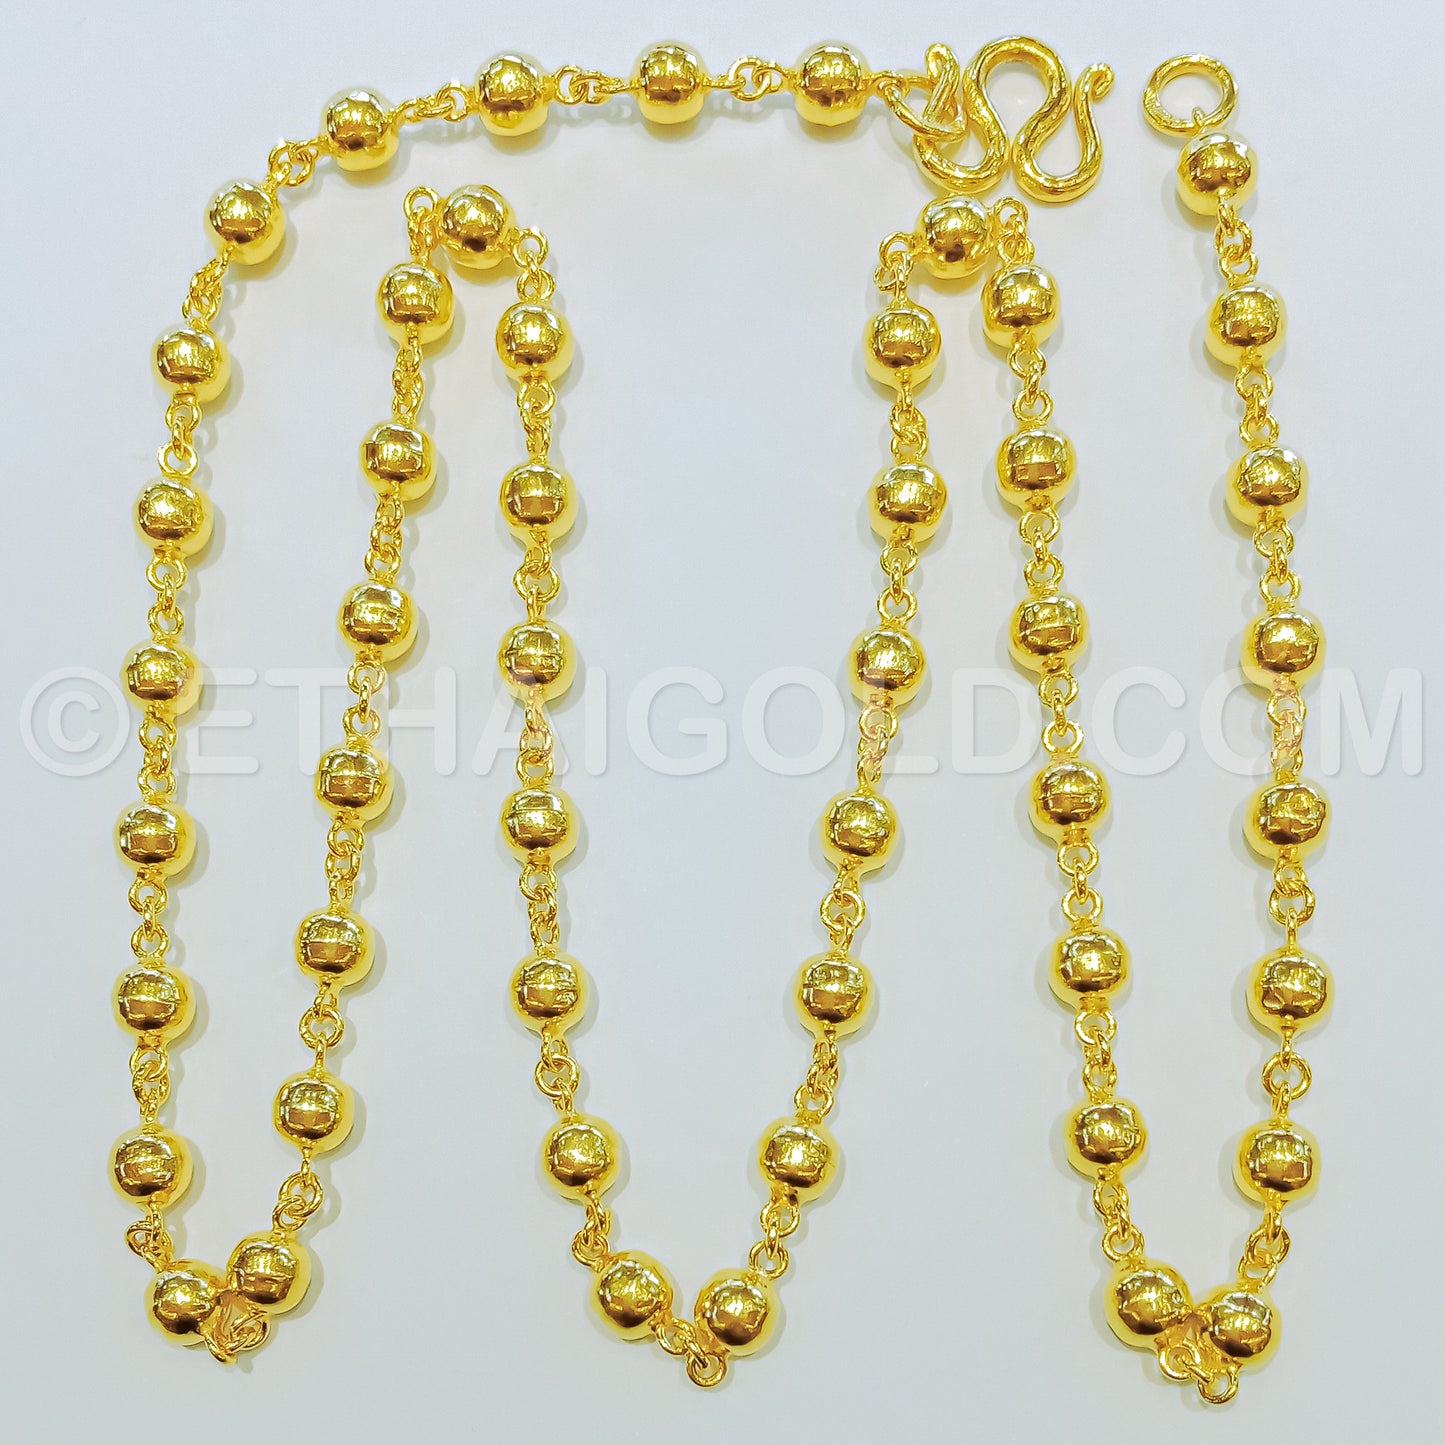 1/2 BAHT POLISHED HOLLOW ROSARY BEAD CHAIN NECKLACE IN 23K GOLD (ID: N3502S)